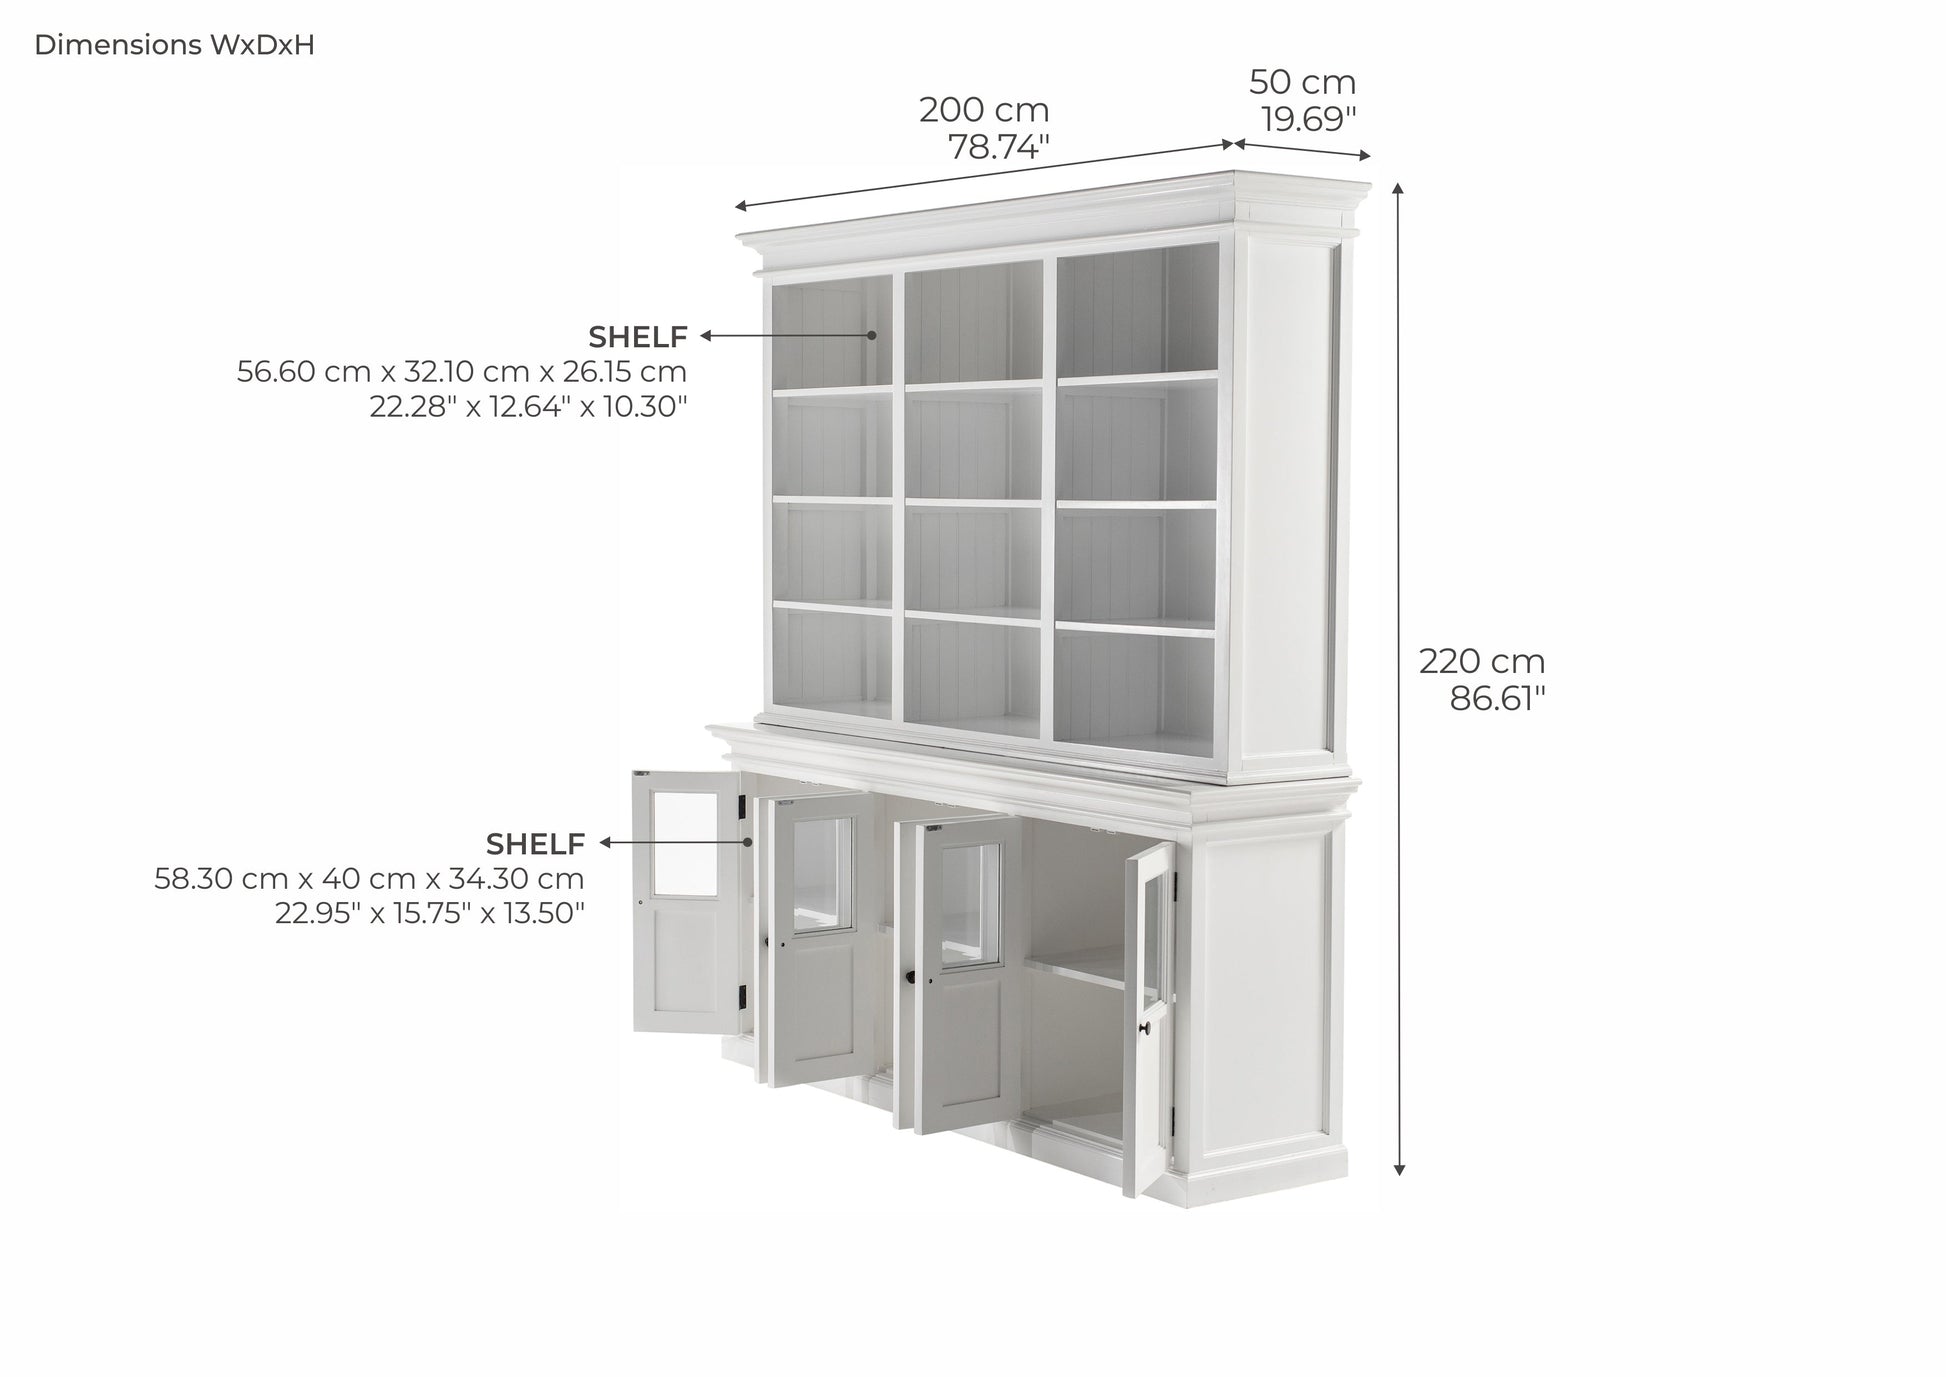 NovaSolo Halifax 79" Classic White Hutch Cabinet Unit With 6 Bevelled Glass Doors